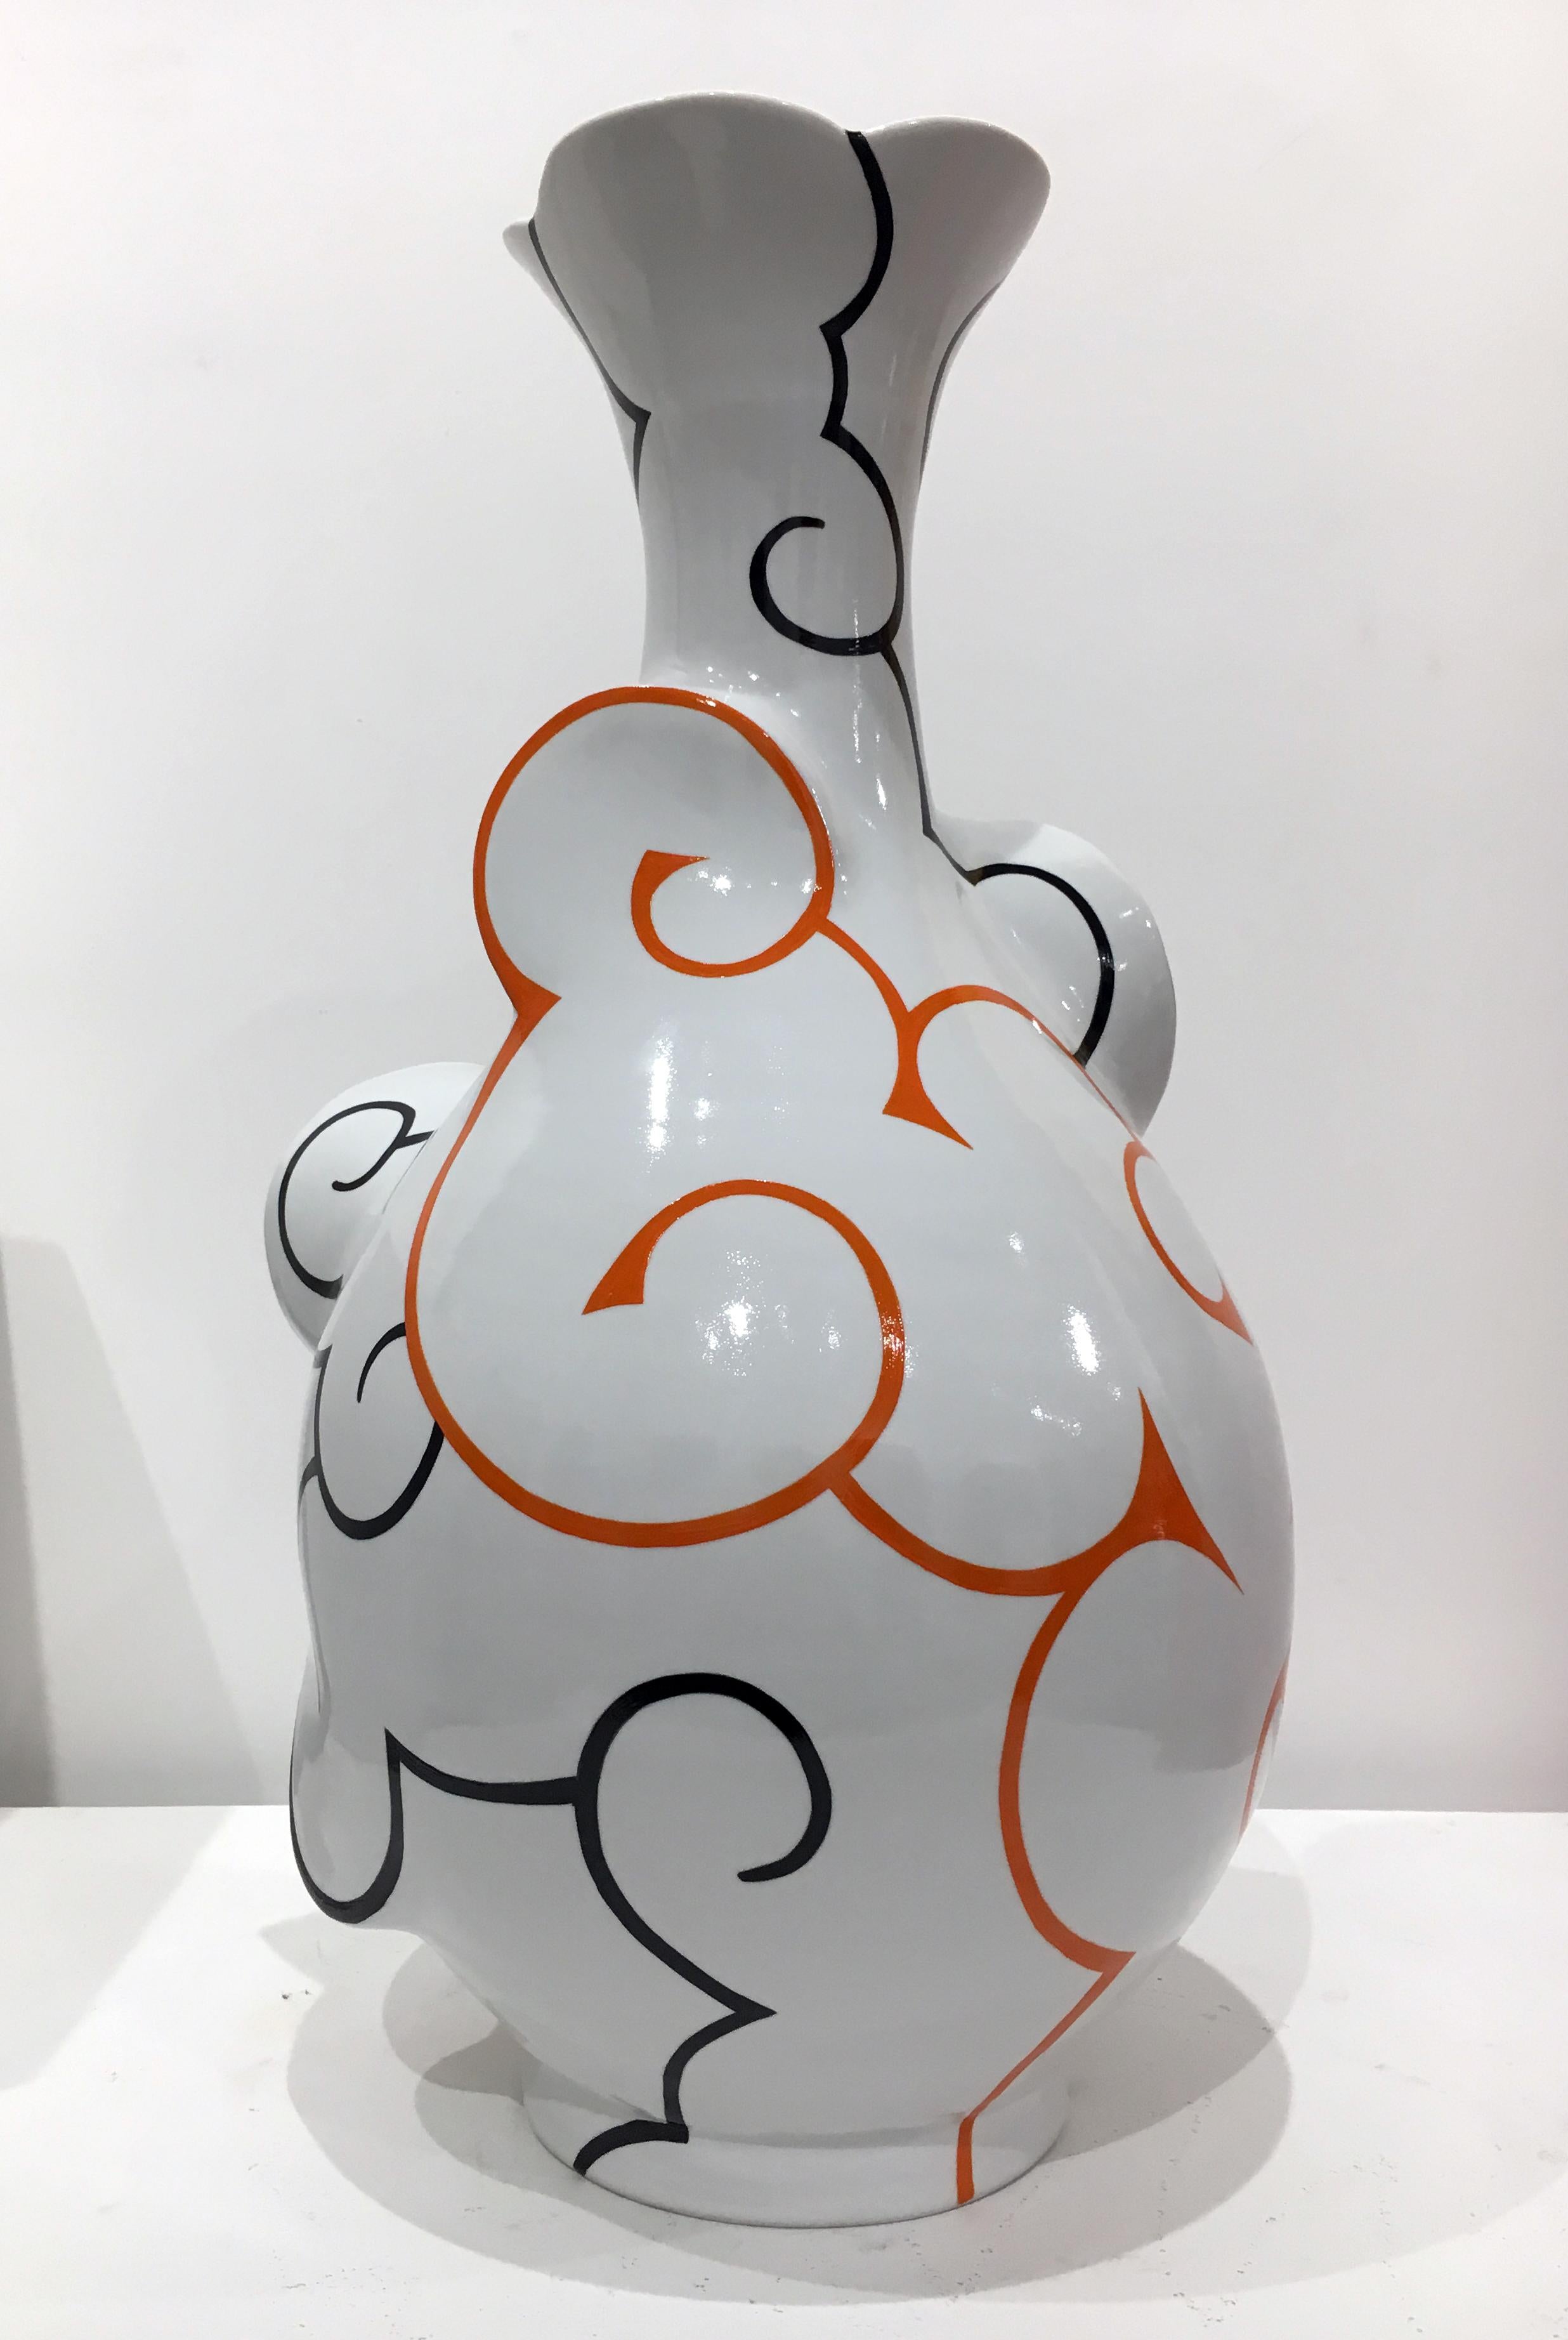 Sam Chung Abstract Sculpture - Flared Cloud Pear Bottle, Contemporary Ceramic Sculpture, Porcelain, China Paint